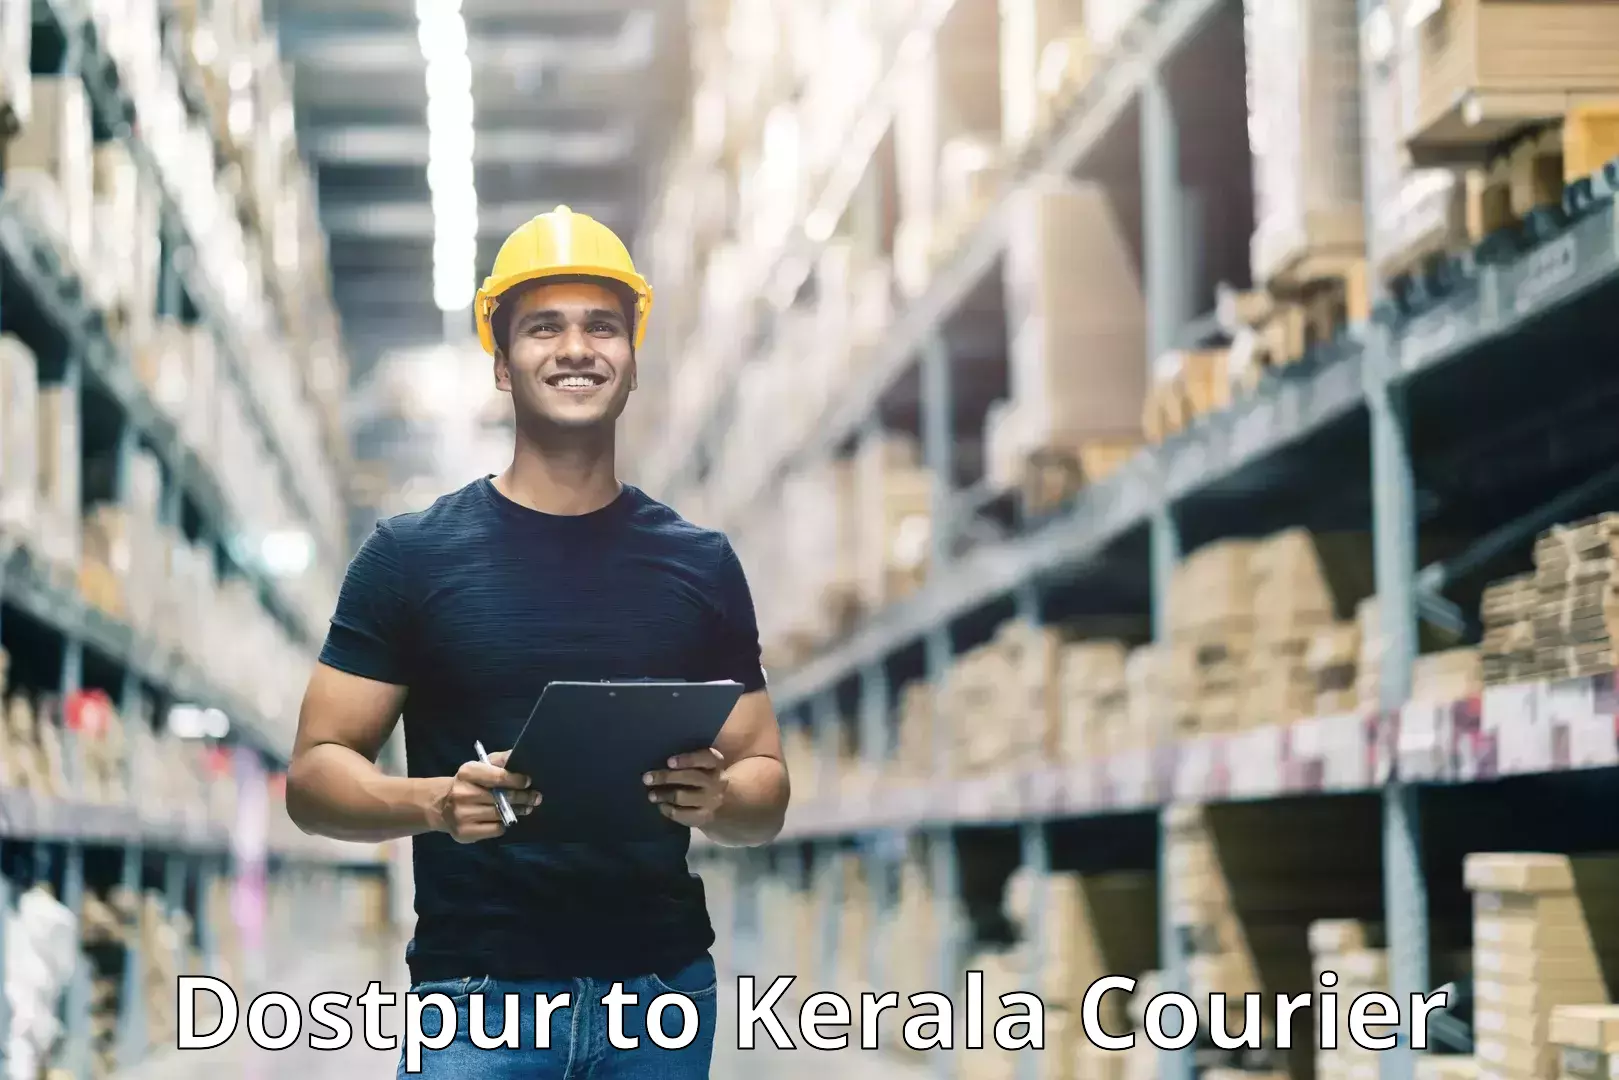 Courier service innovation Dostpur to Alappuzha